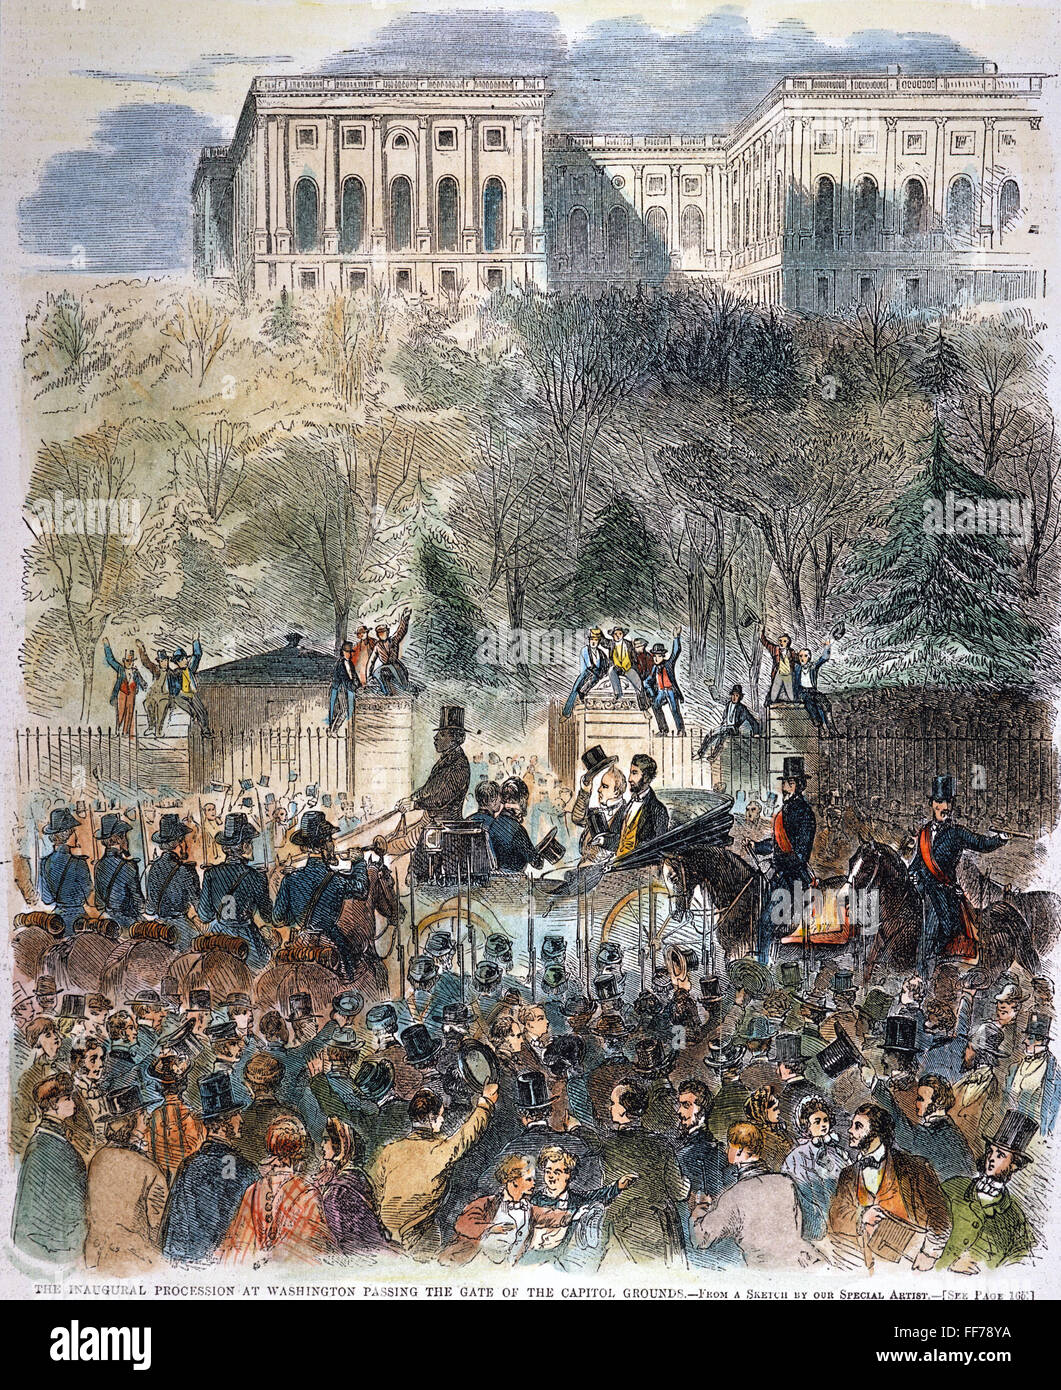 LINCOLN INAUGURATION. /nAbraham Lincoln arriving at the Capitol, in an open carriage with outgoing President James Buchanan, for his inauguration as 16th President of the United States on 4 March 1861. Color engraving, 1861. Stock Photo